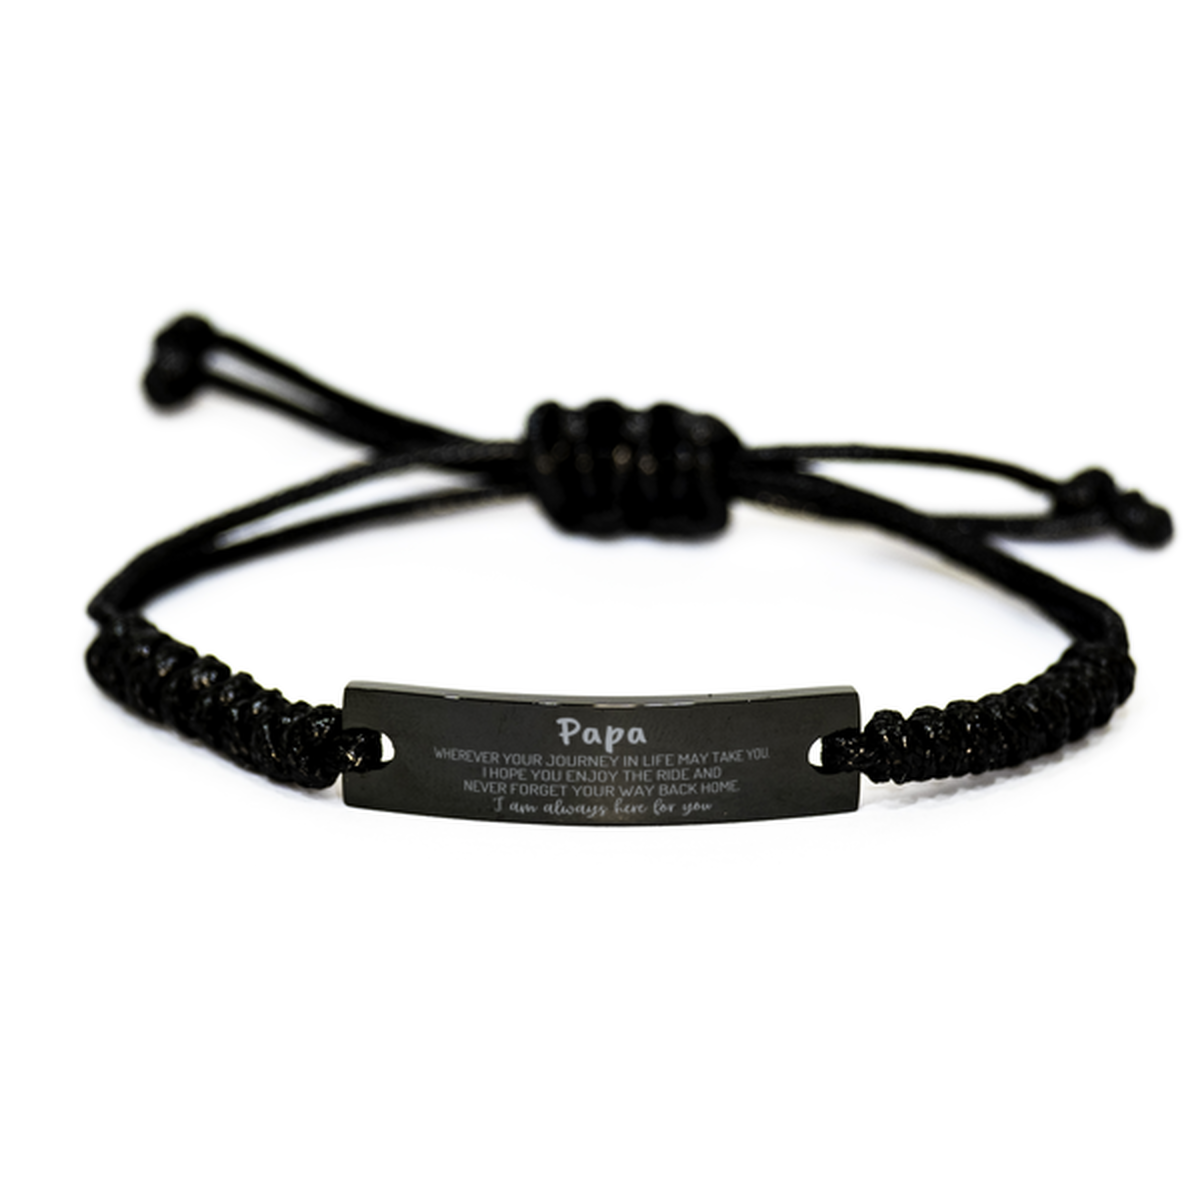 Papa wherever your journey in life may take you, I am always here for you Papa Black Rope Bracelet, Awesome Christmas Gifts For Papa, Papa Birthday Gifts for Men Women Family Loved One